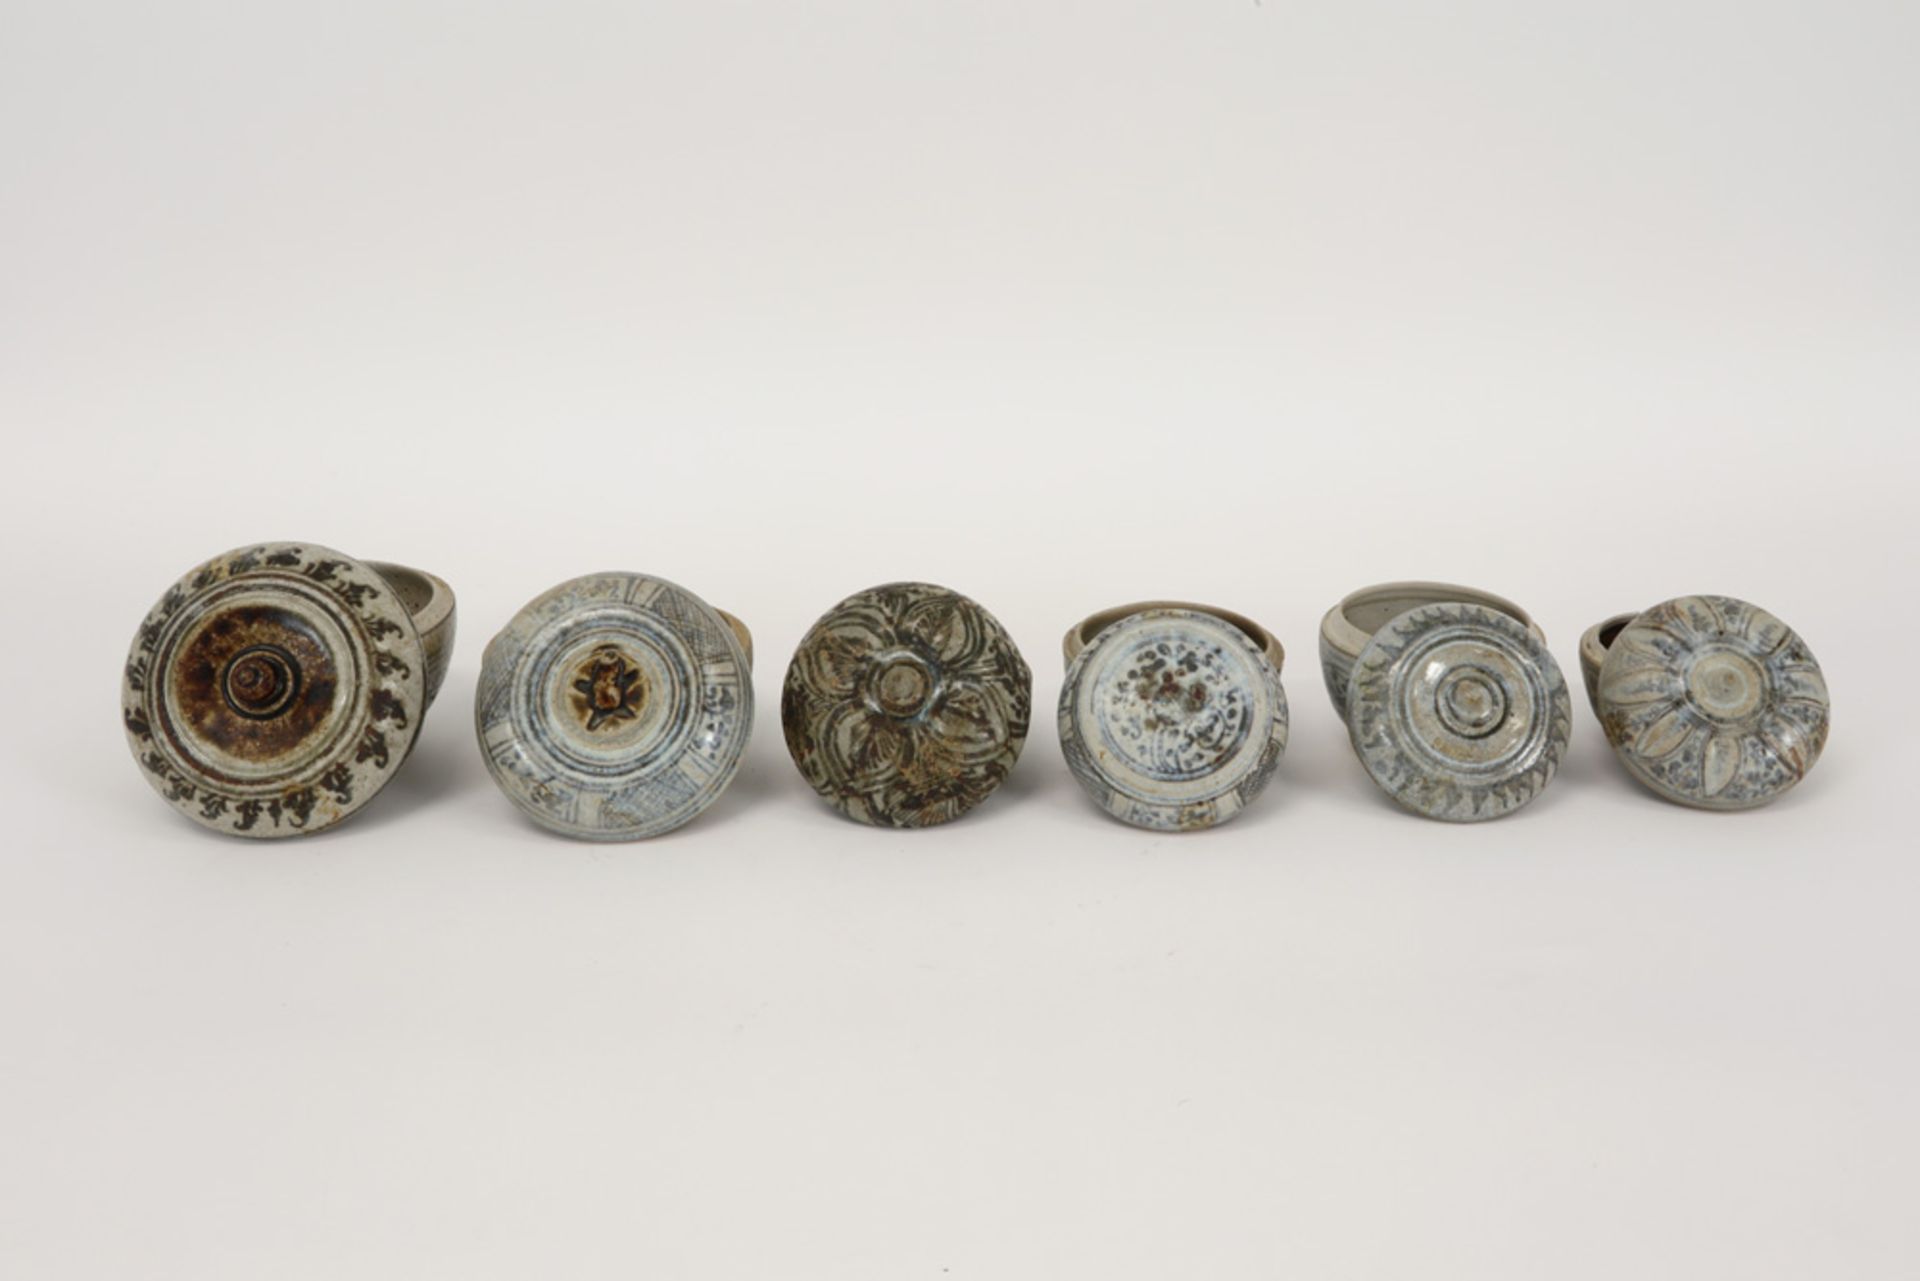 five 15th/16th Cent. Ancient Siamese lidded Sawankhalok bowls in glazed earthenware with floral - Image 2 of 3